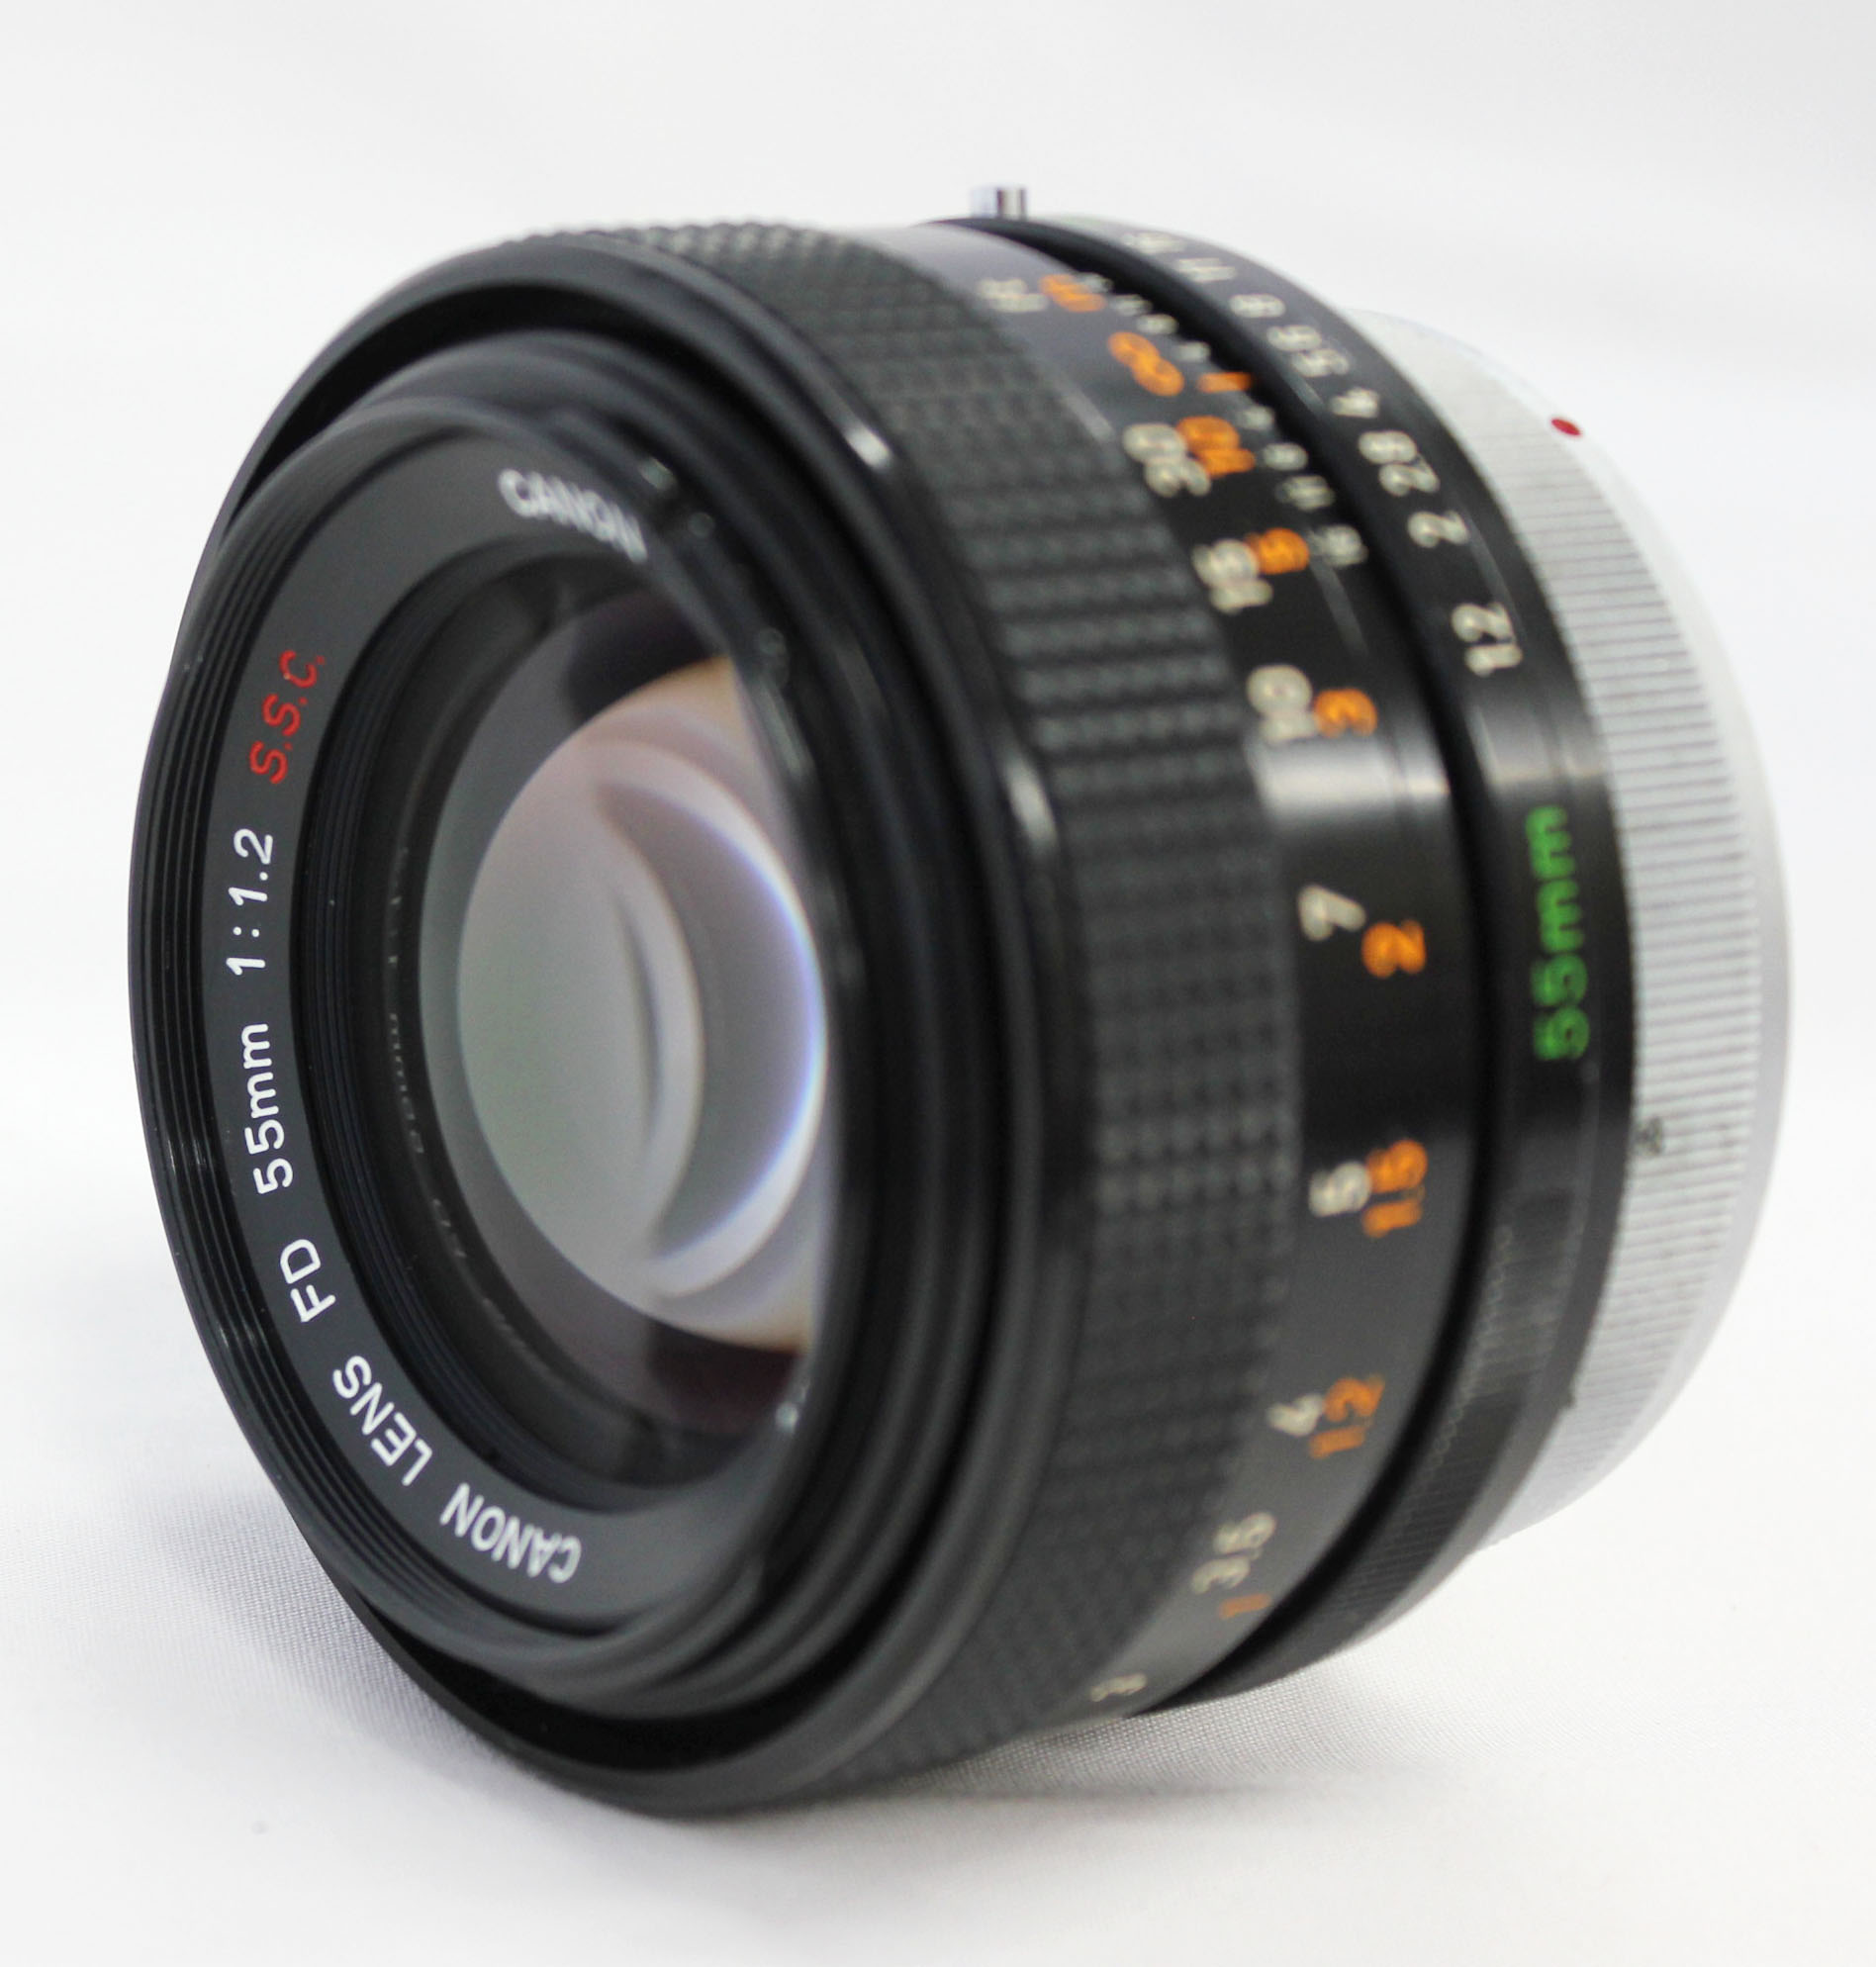  Canon FD 55mm F/1.2 S.S.C. ssc MF Standard Prime Lens from Japan Photo 1